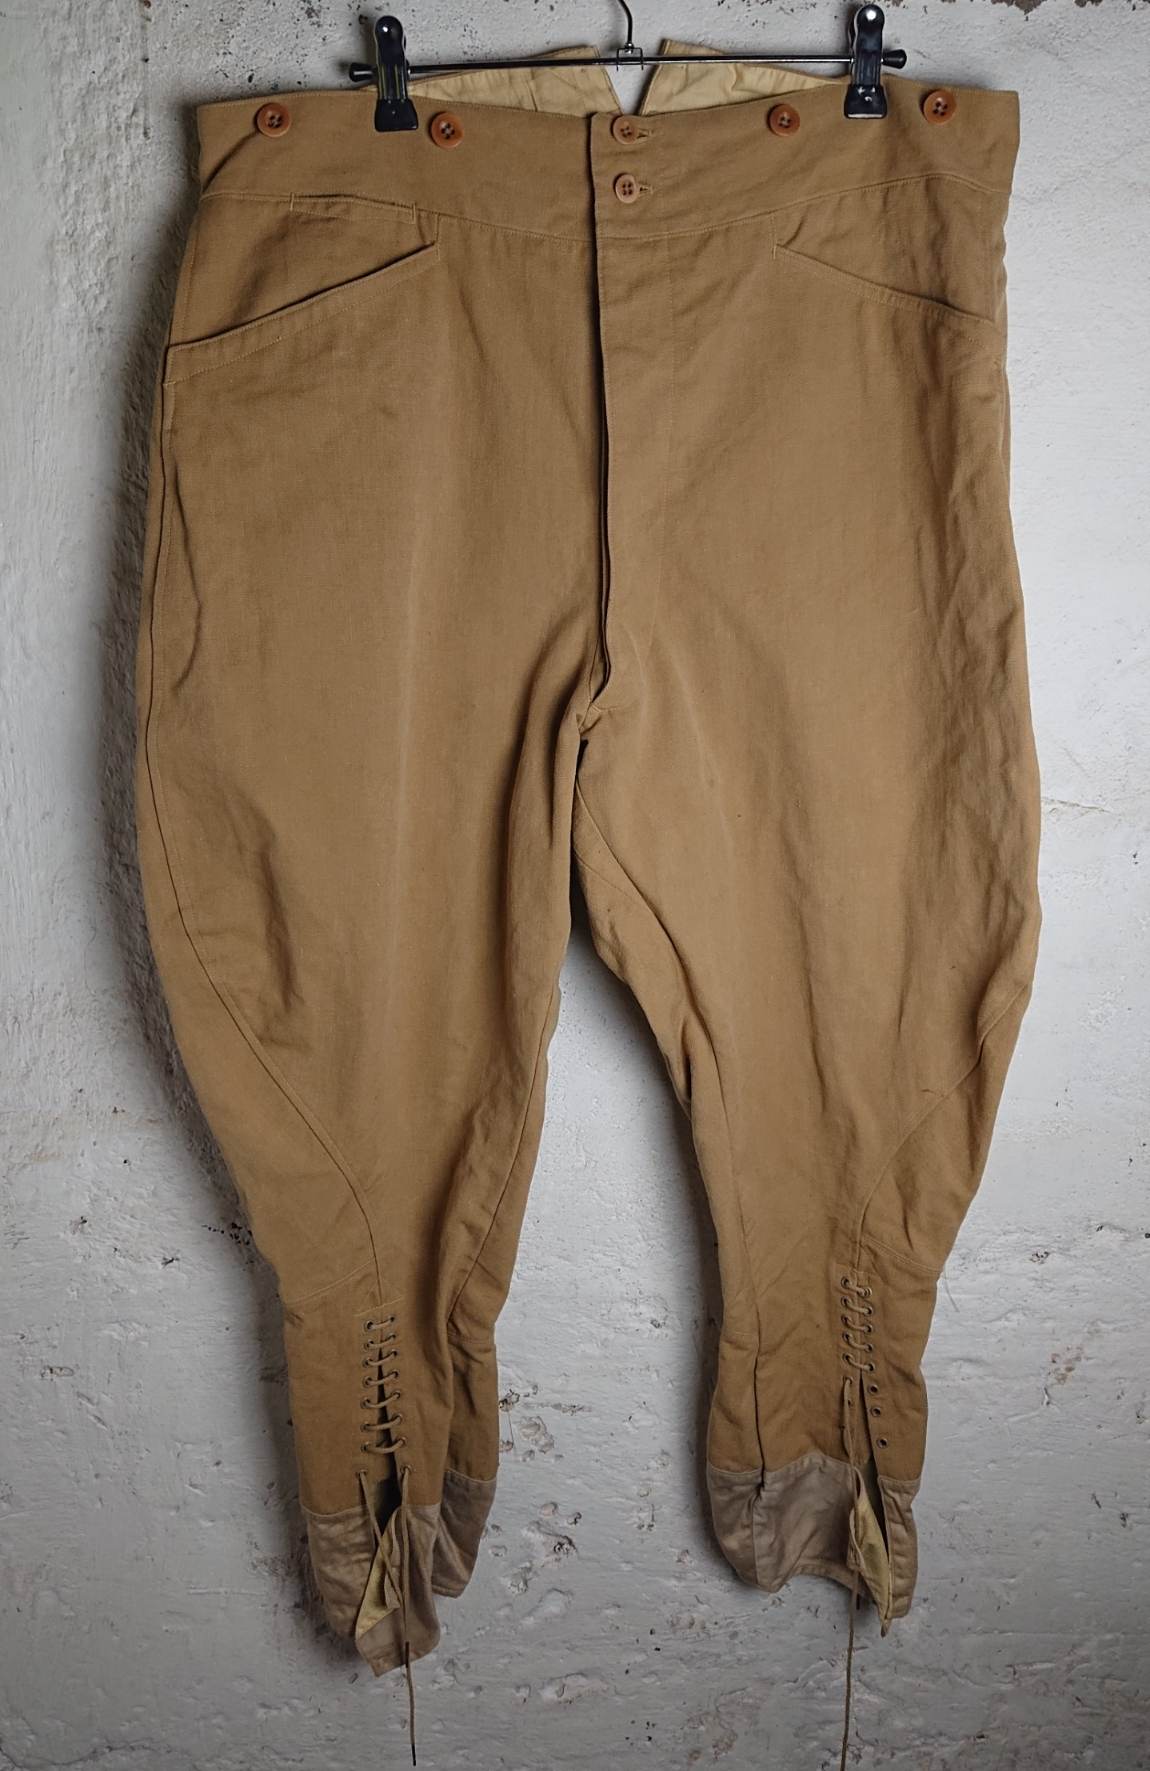 militaria : culotte mastic officier France 40 / officer mastic trousers